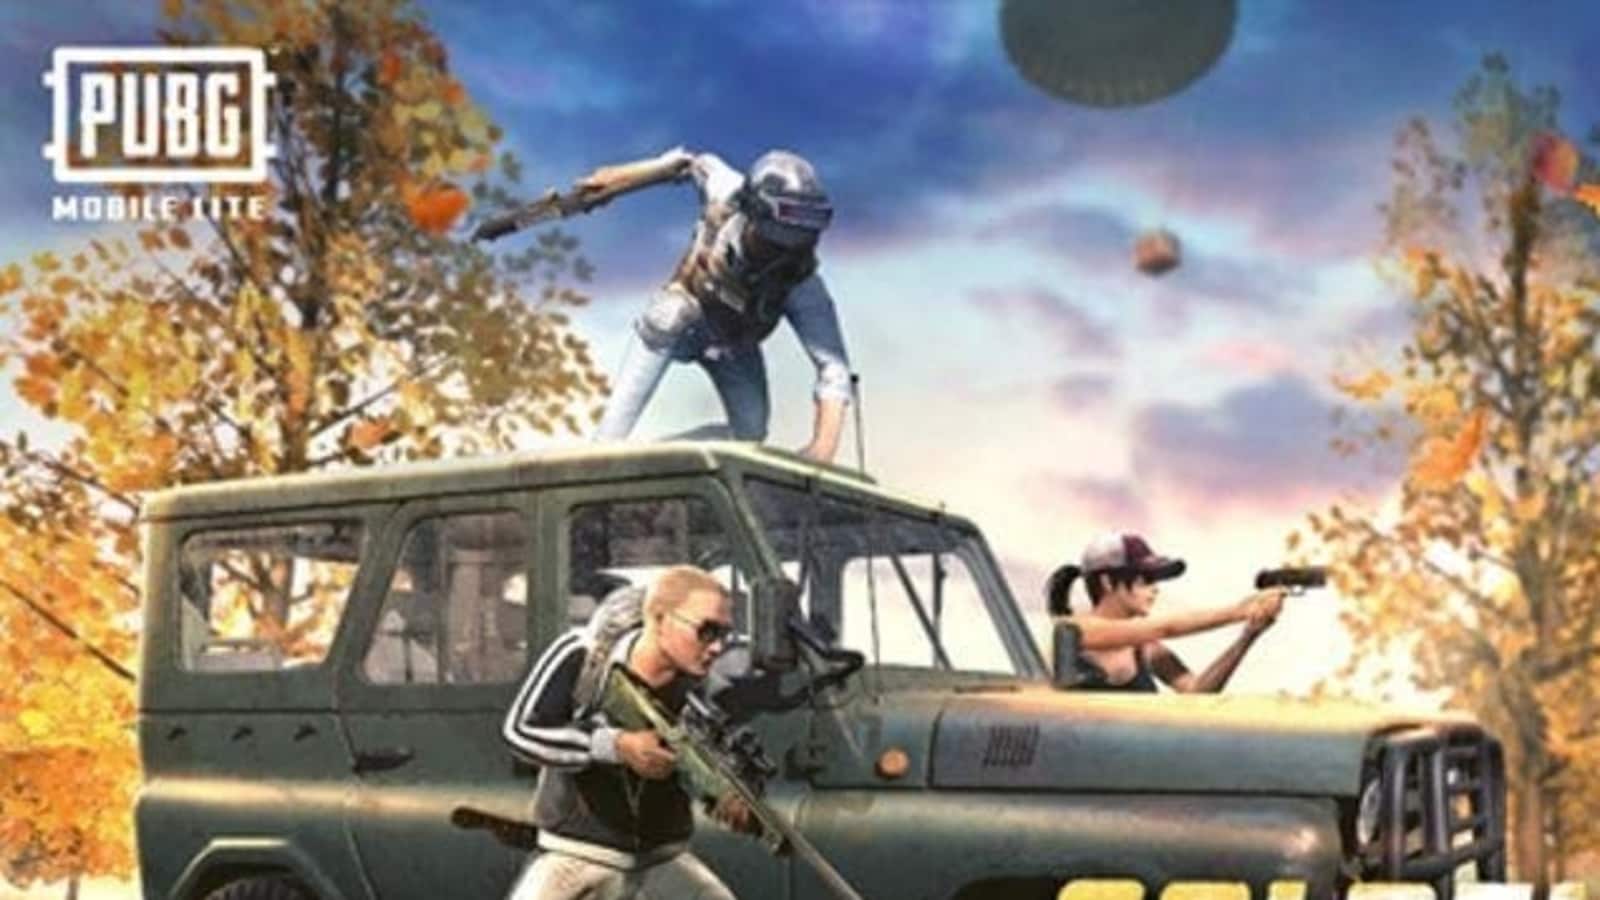 PUBG Mobile Lite APK download: How to get the latest version on phones